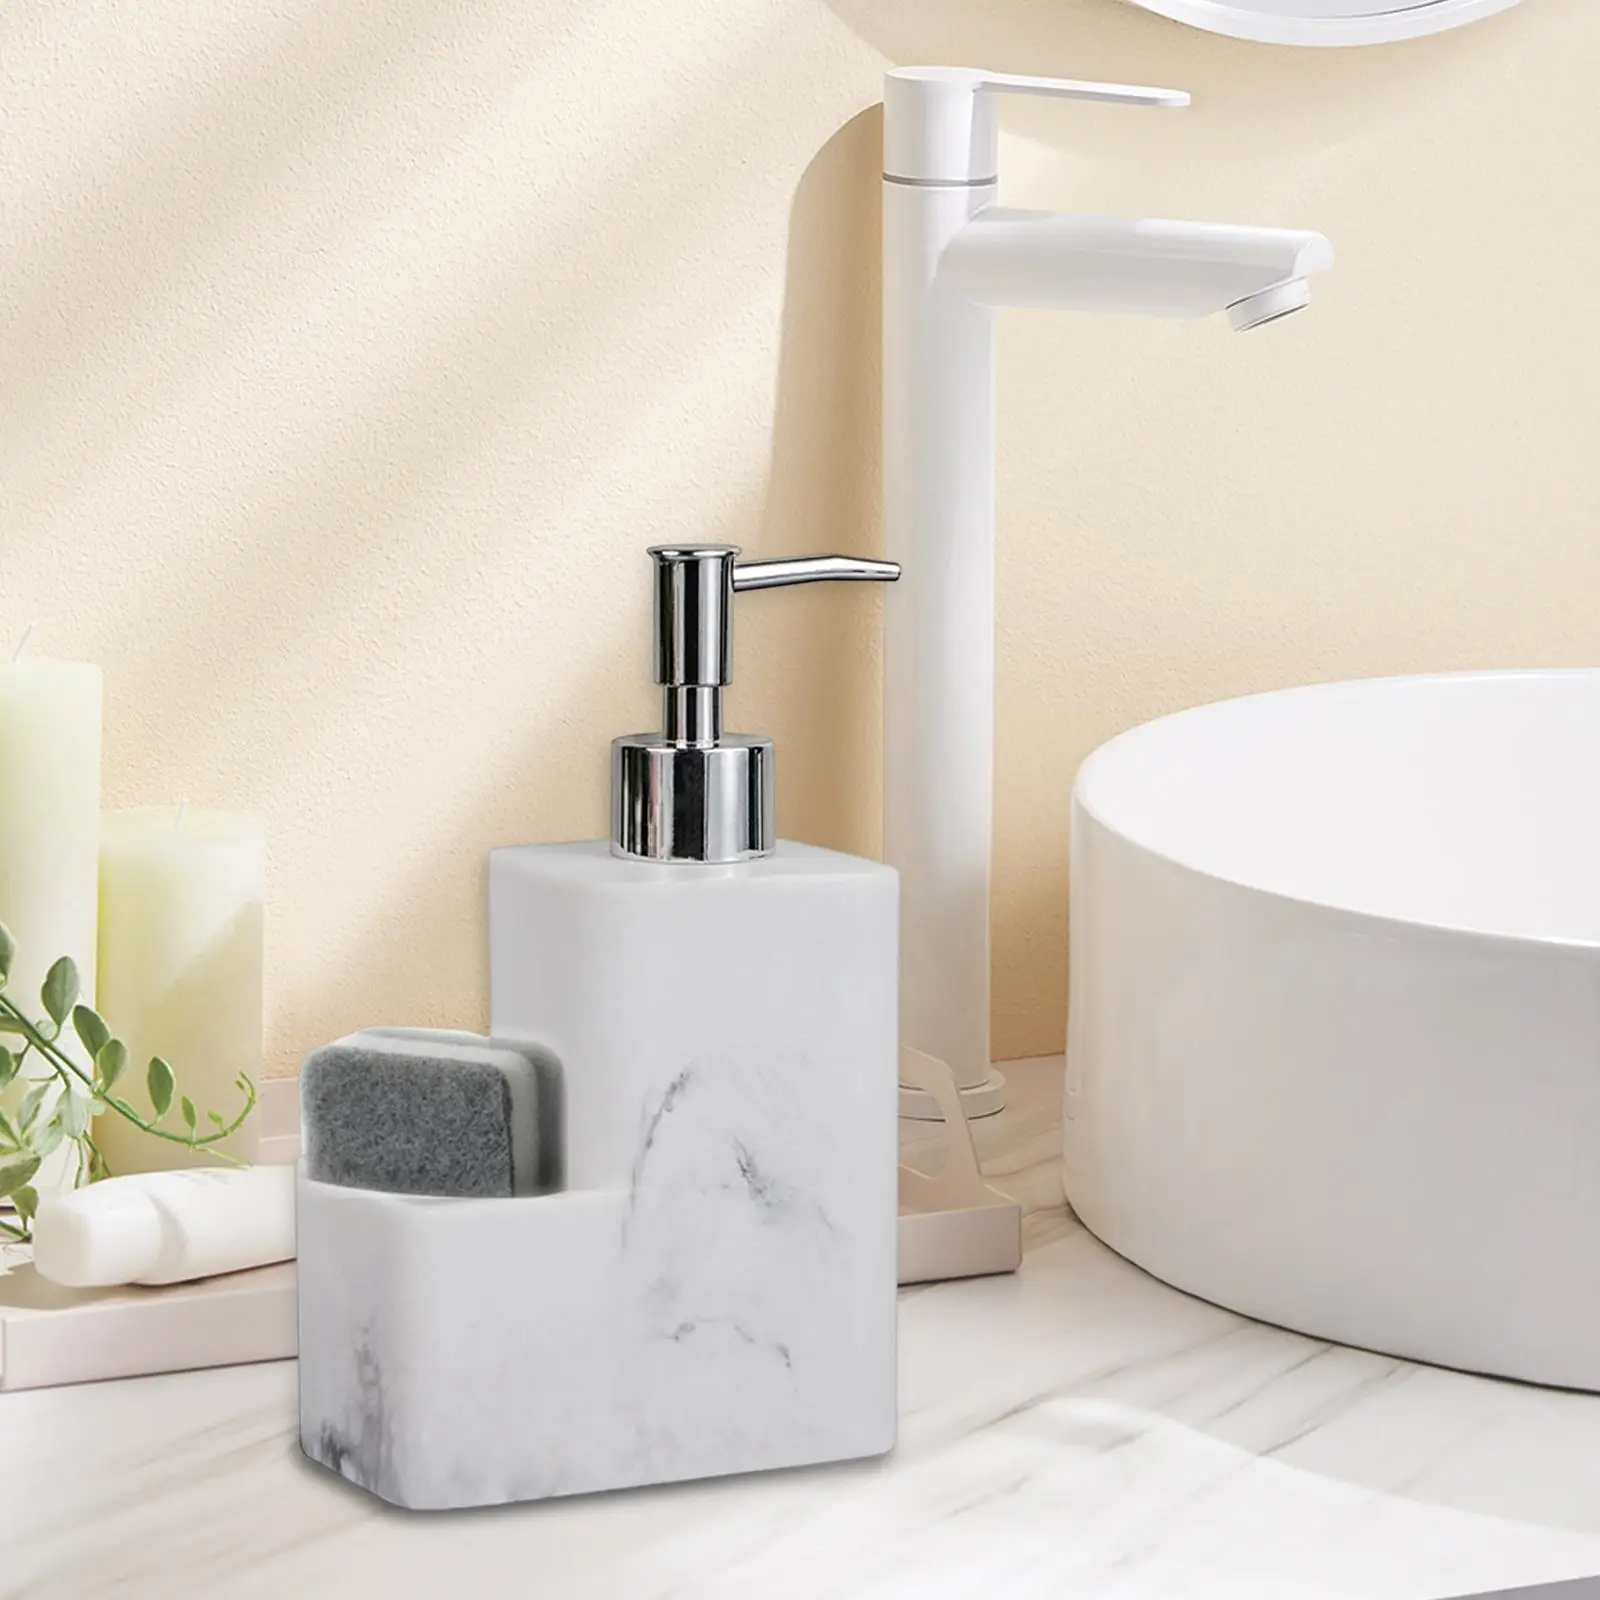 Refillable 350ml Dish Soap Dispenser Pump Bottle Marble Surface, Organizer Holder Stores Scrubbers for Countertop